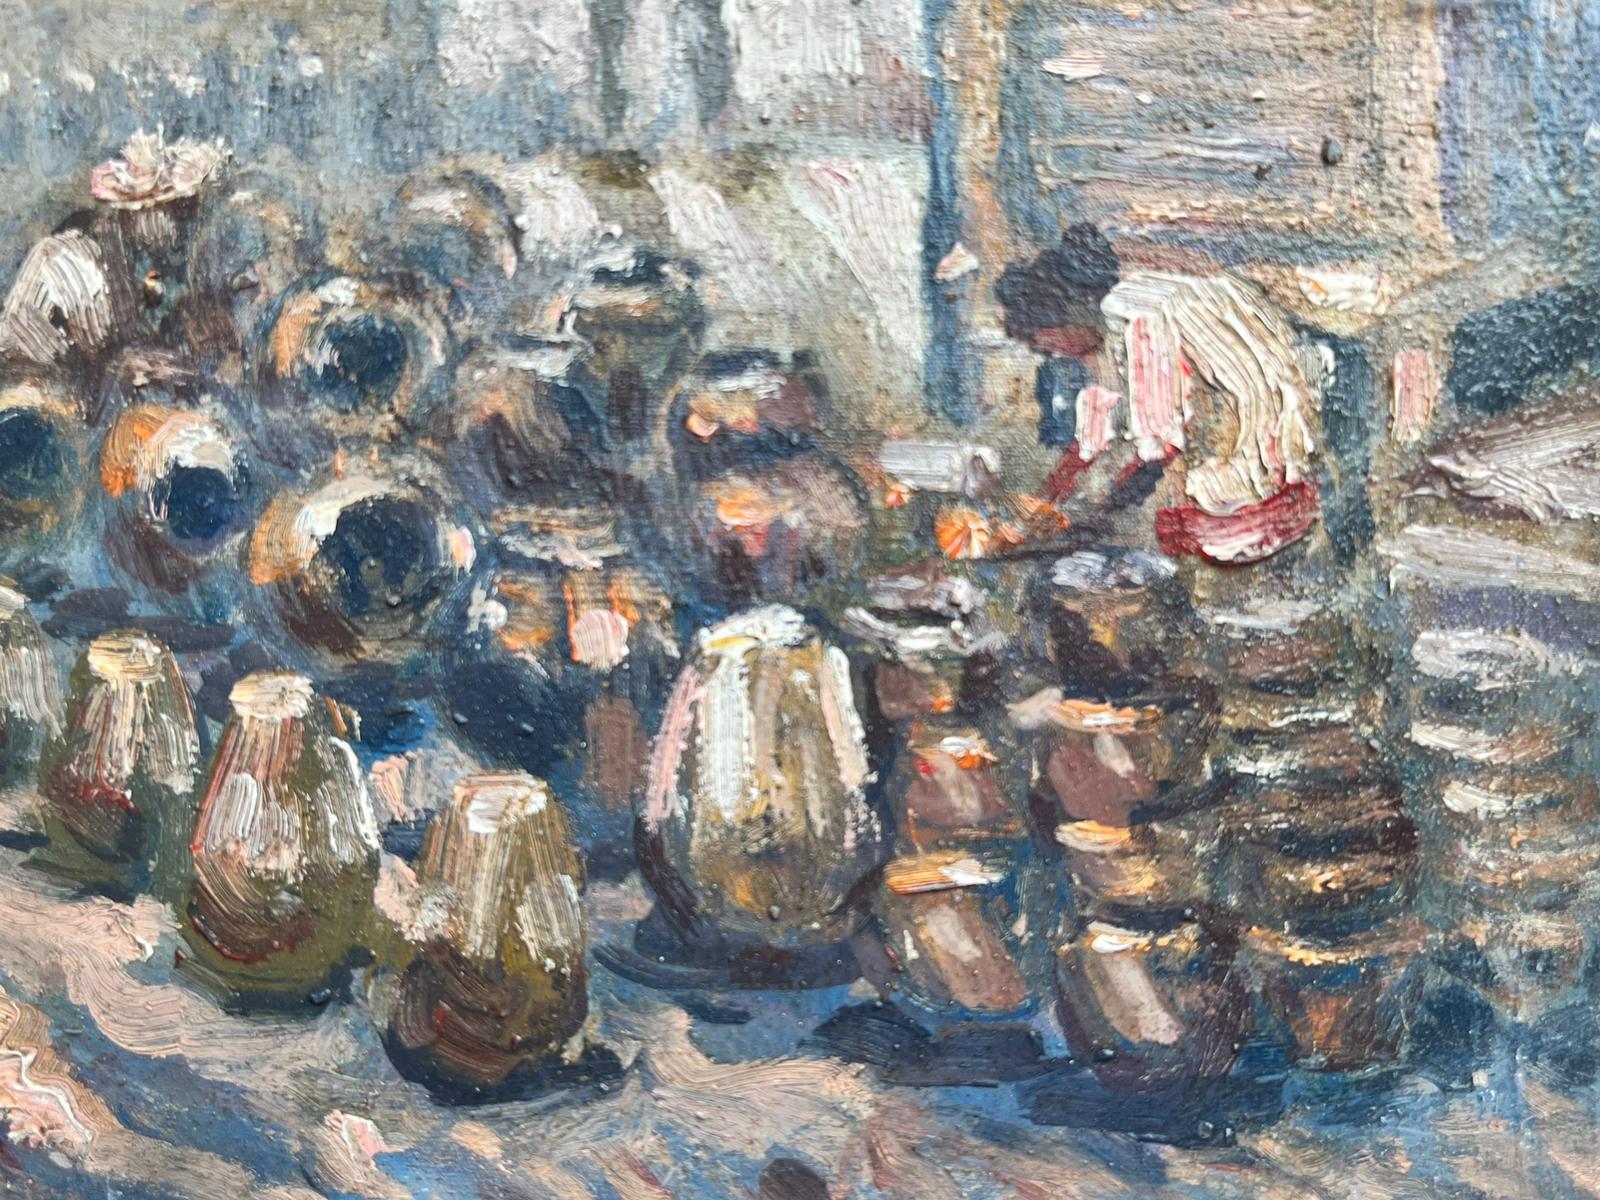 The Pot Seller
French Impressionist, mid 20th century
indistinctly signed lower corner
oil on canvas, unframed
canvas: 7 x 9 inches
provenance: private collection
condition: sound
